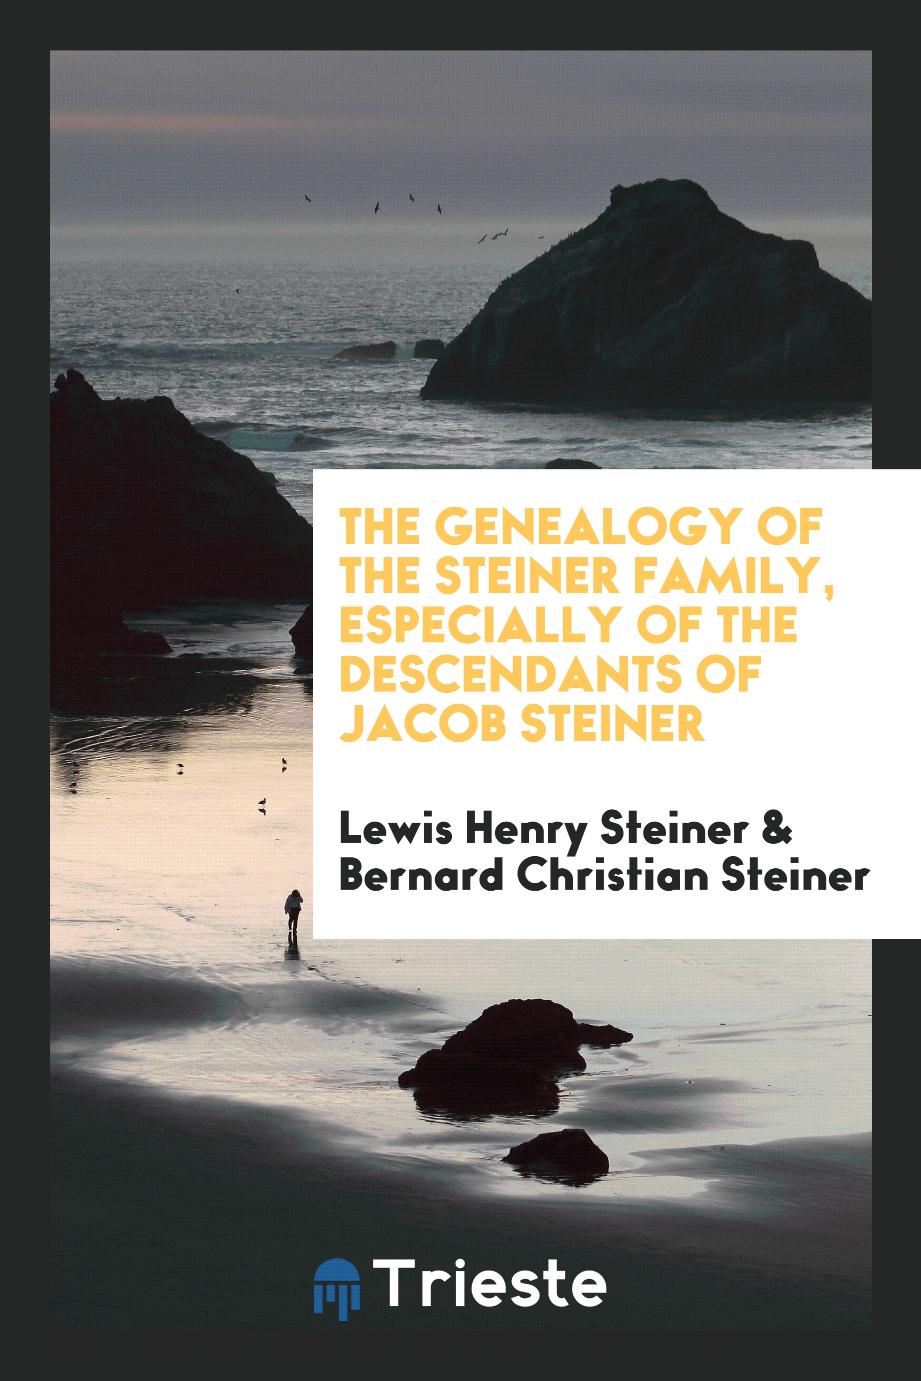 The genealogy of the Steiner family, especially of the descendants of Jacob Steiner